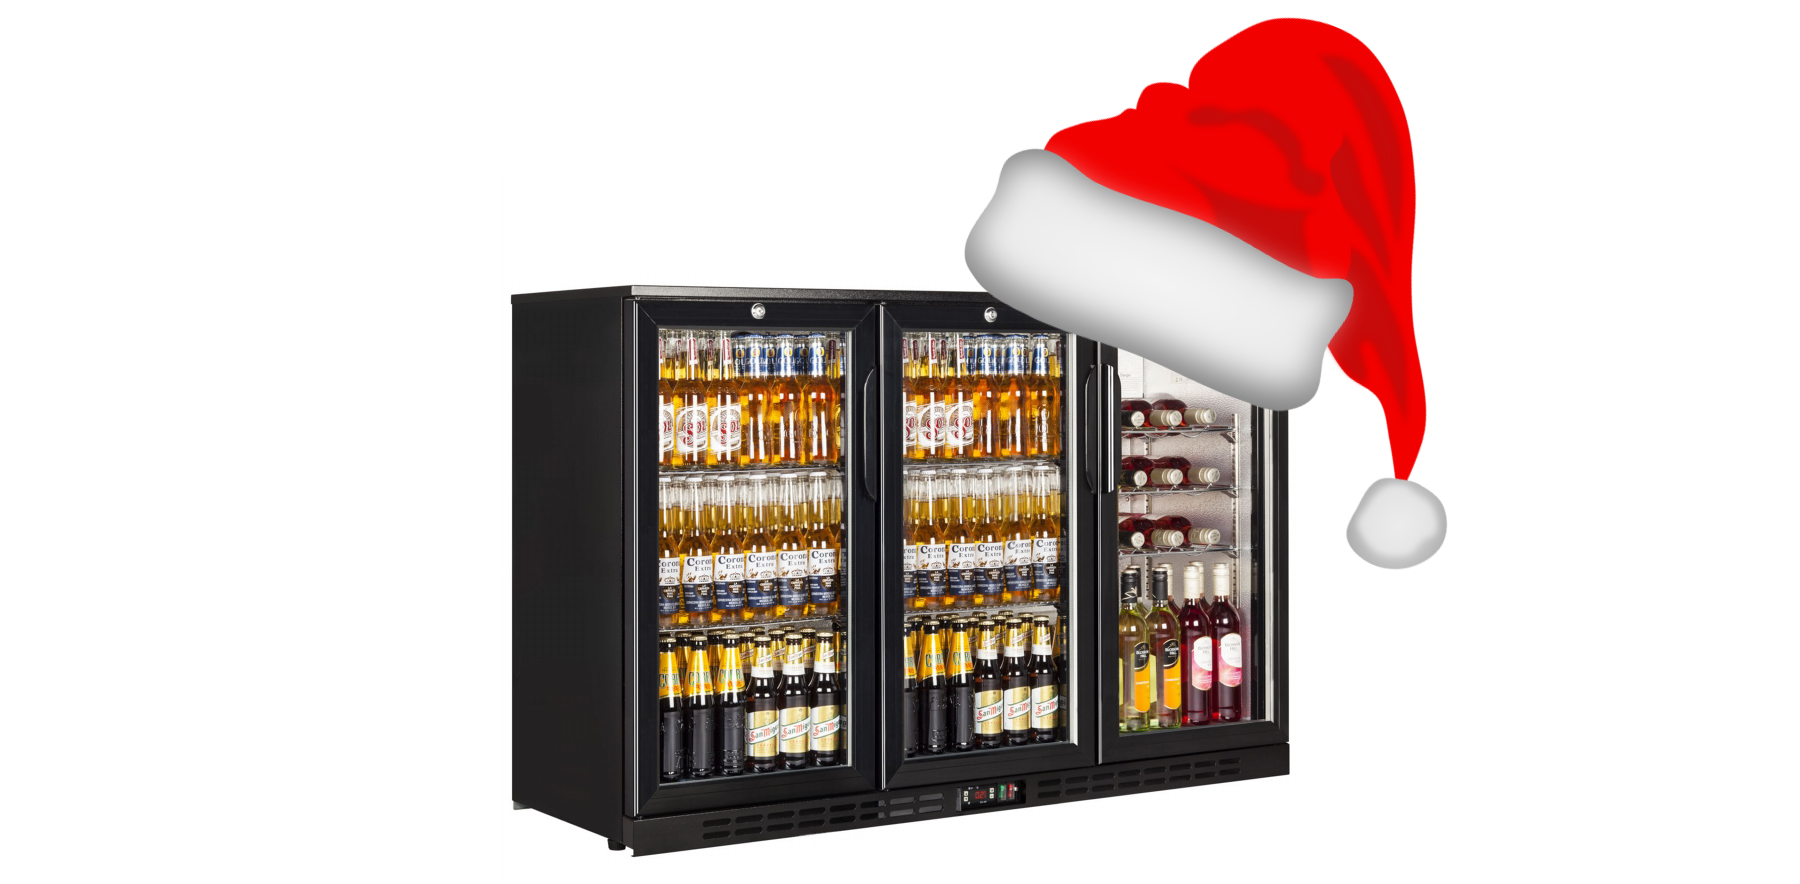 Is Your Refrigeration Prepared for Christmas?